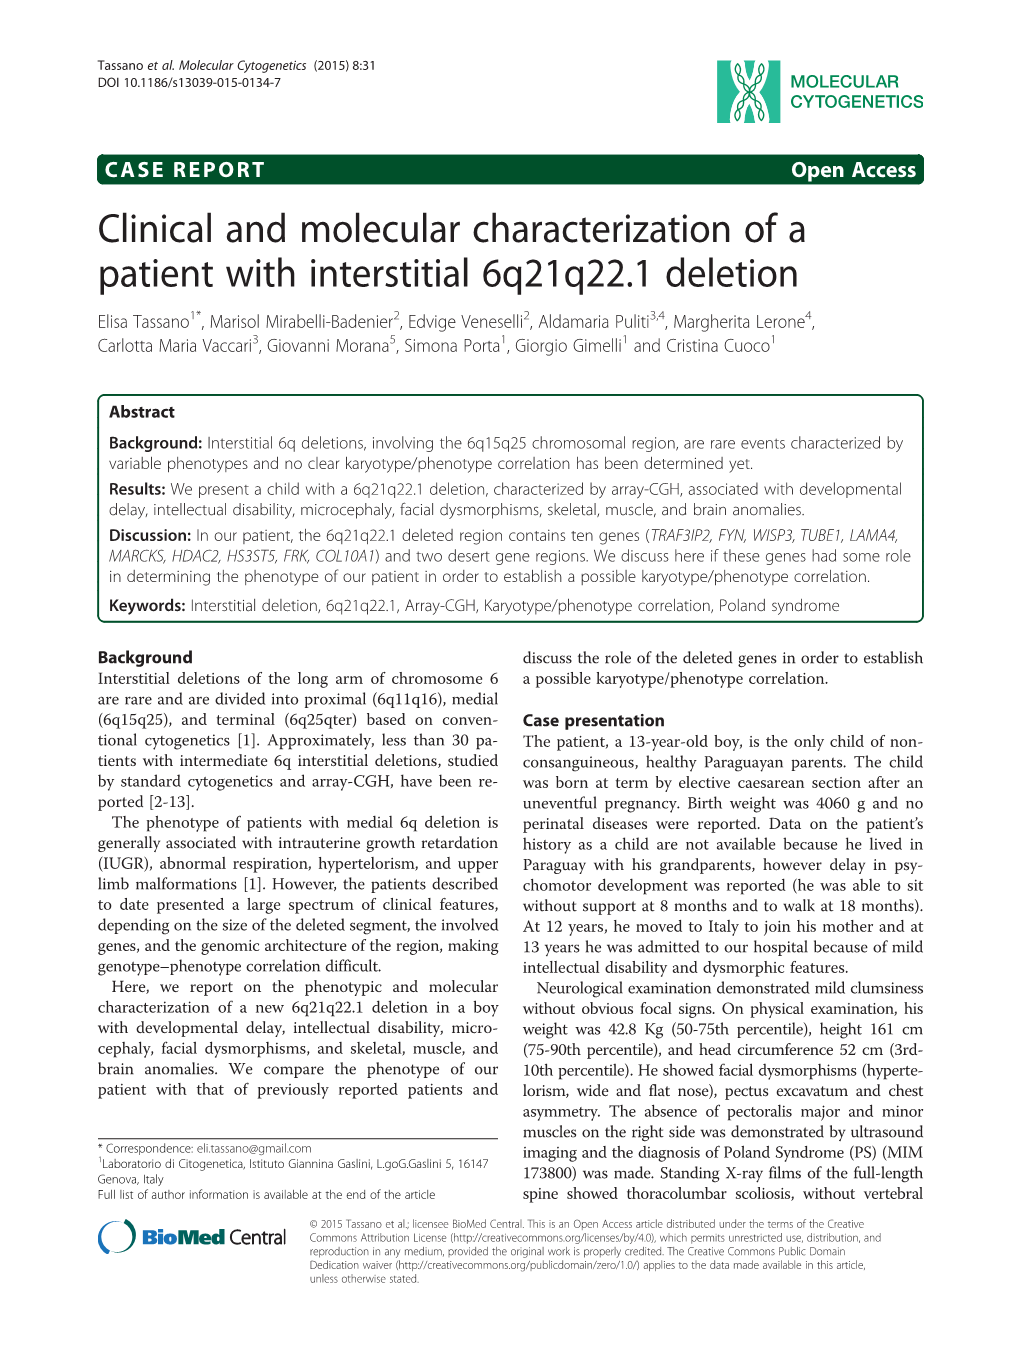 Clinical and Molecular Characterization of a Patient With